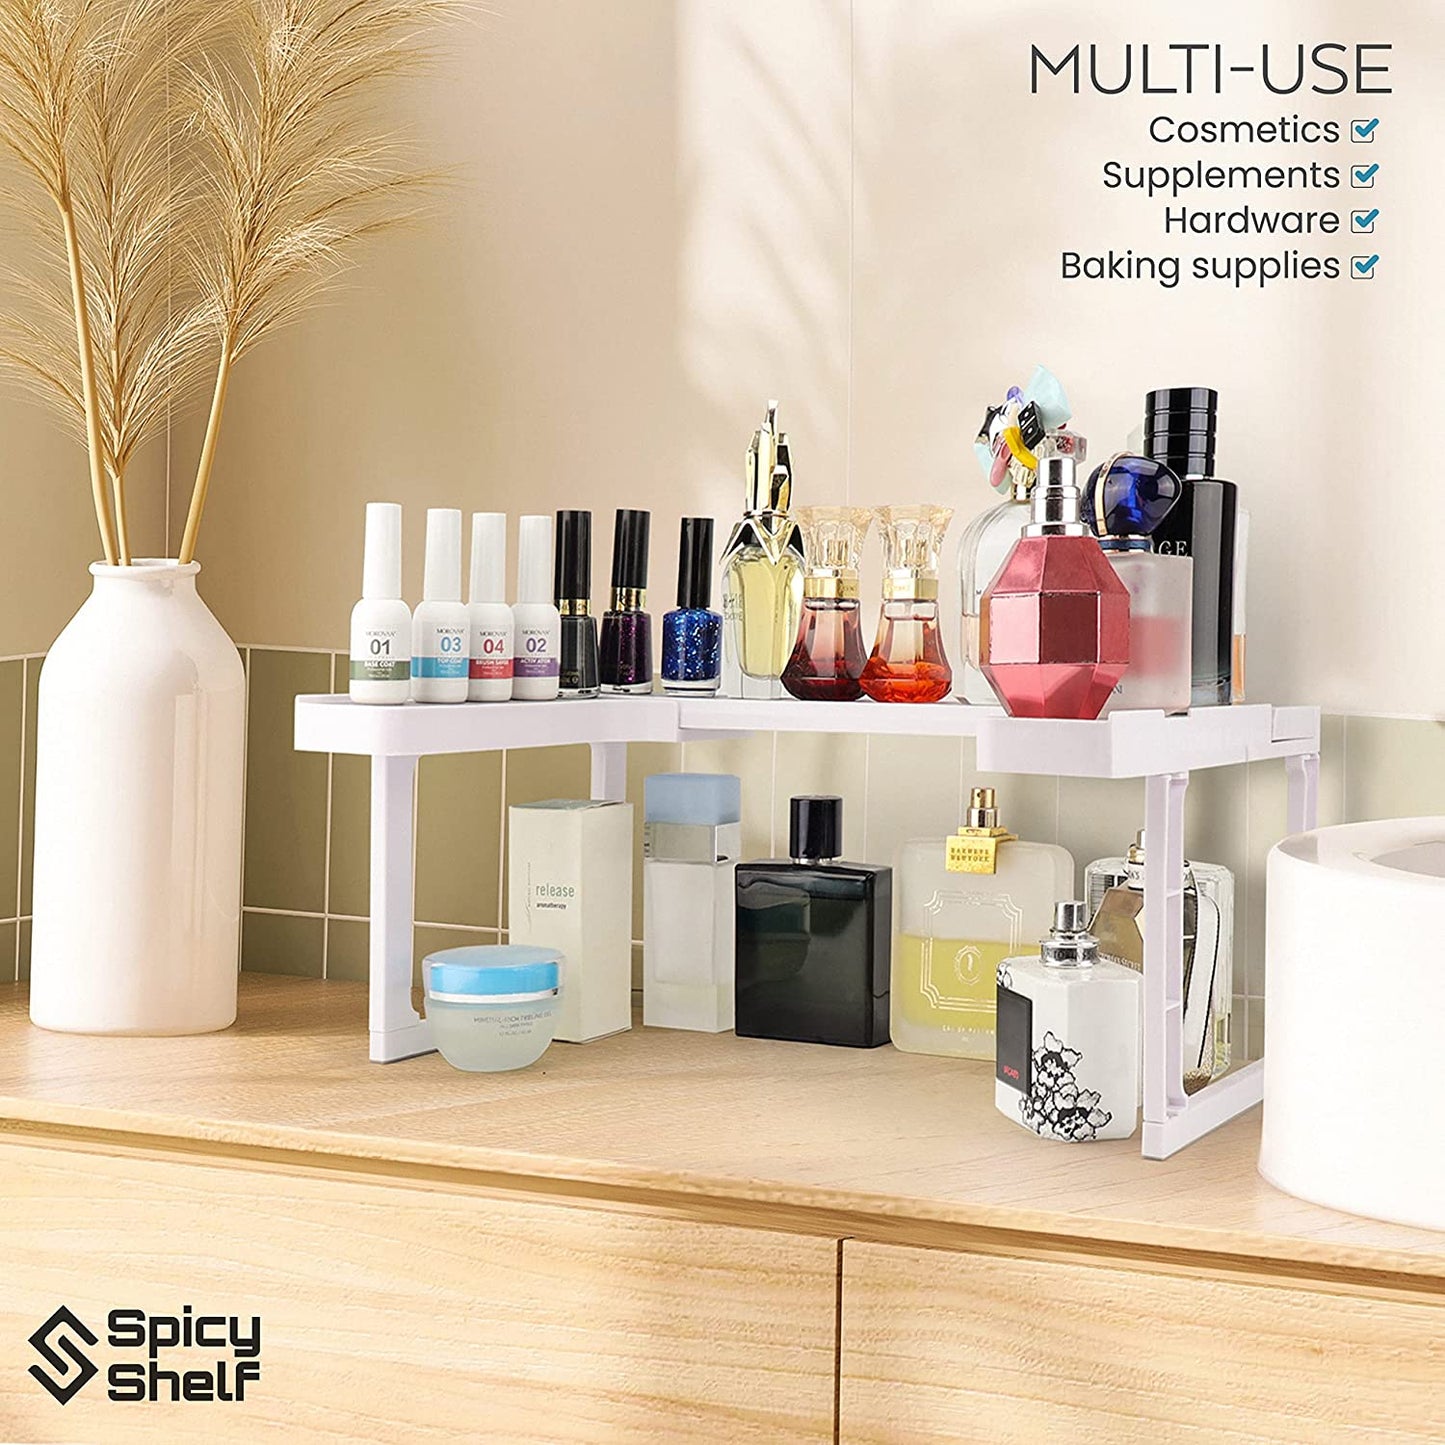 An expandable spice rack on a wooden counter. Instead of spices there are a number of beauty related items on the rack showing that it can used for more than just spices. The text reads, 'Multi-use. Cosmetics, supplements, hardware, baking supplies.'